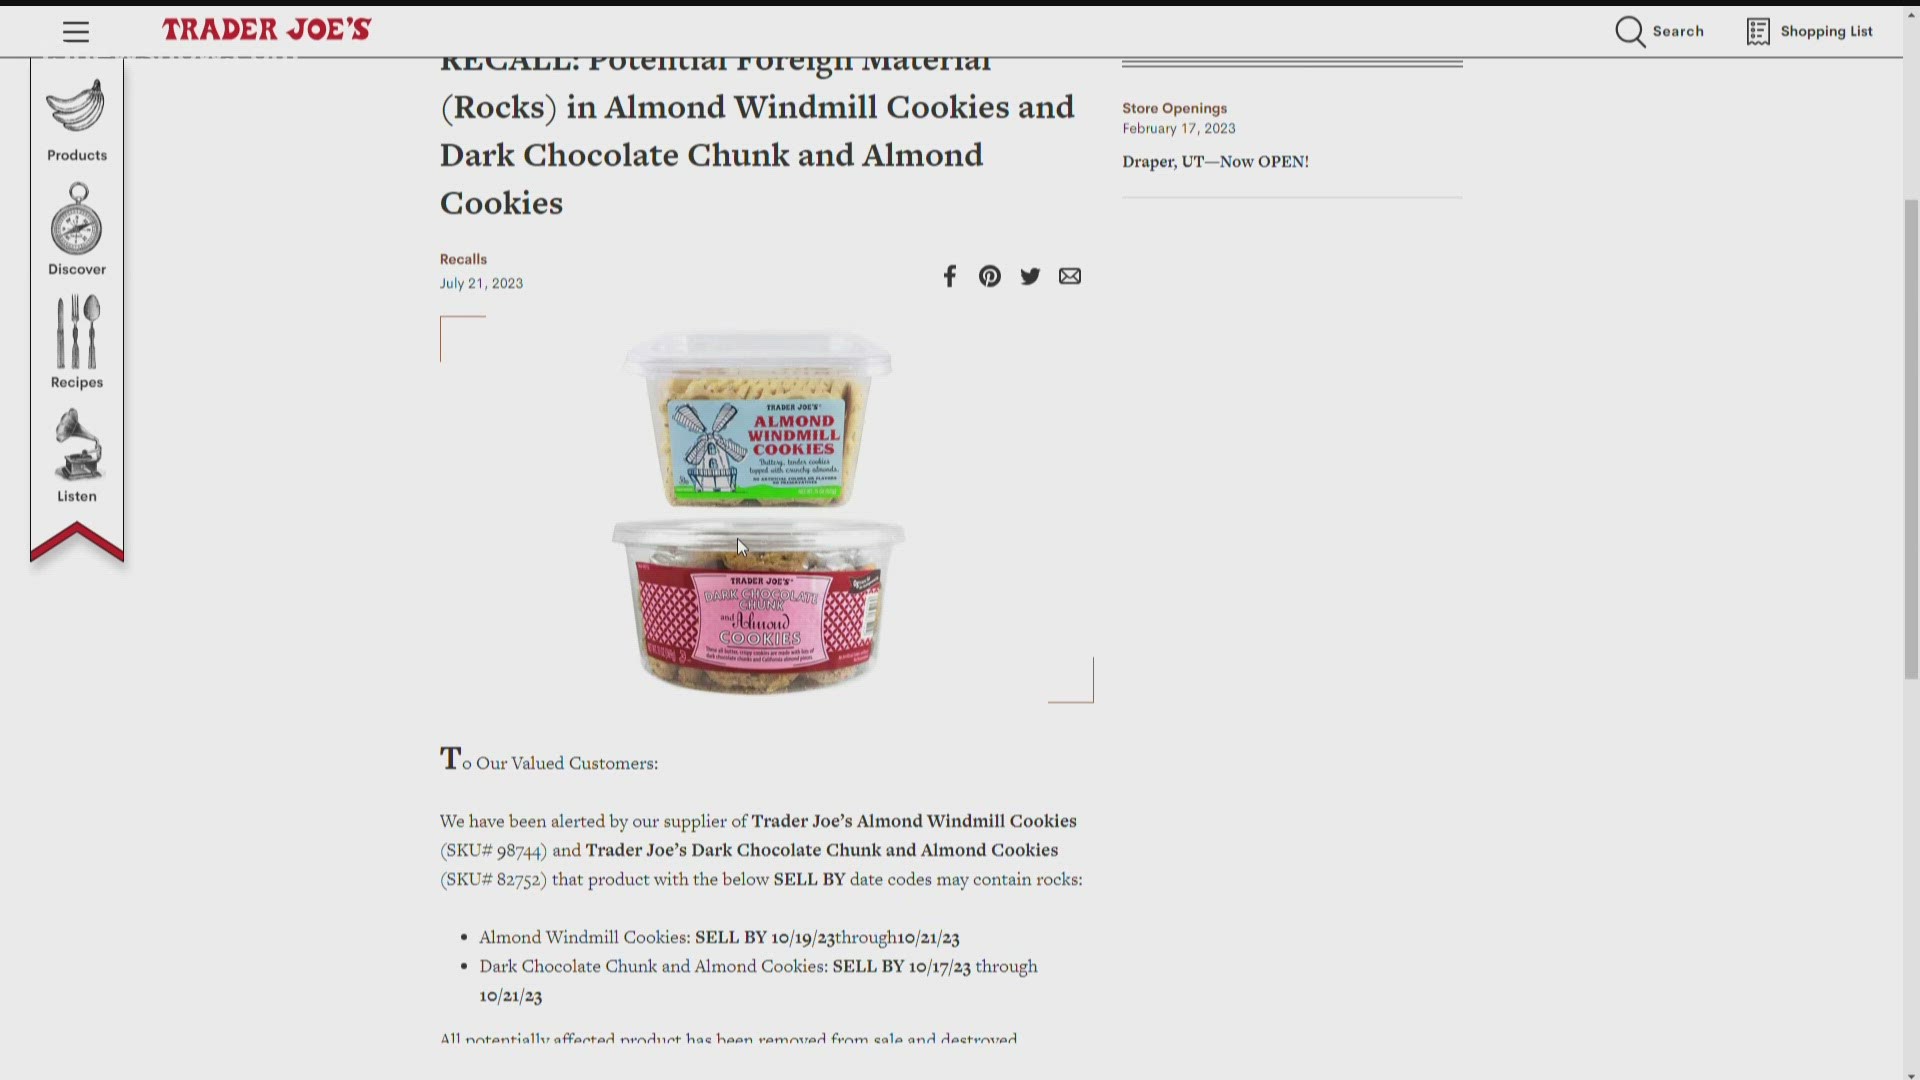 Trader Joe's announces recall on cookies that could contain rocks